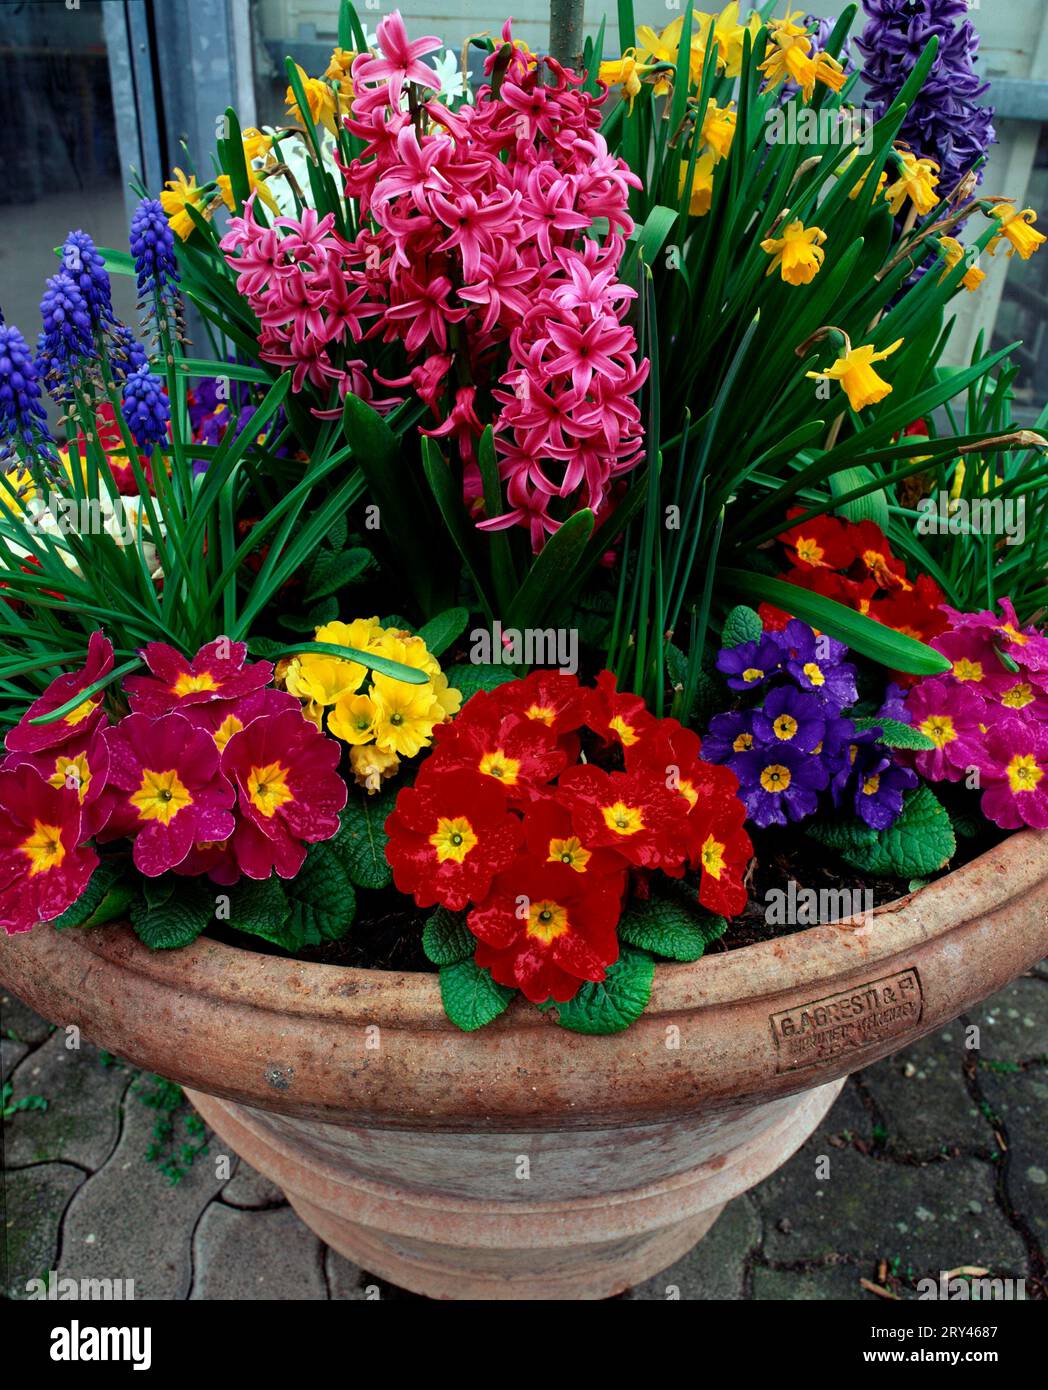 Tub with spring flowers, garden primroses, hyacinths and daffodils Stock Photo